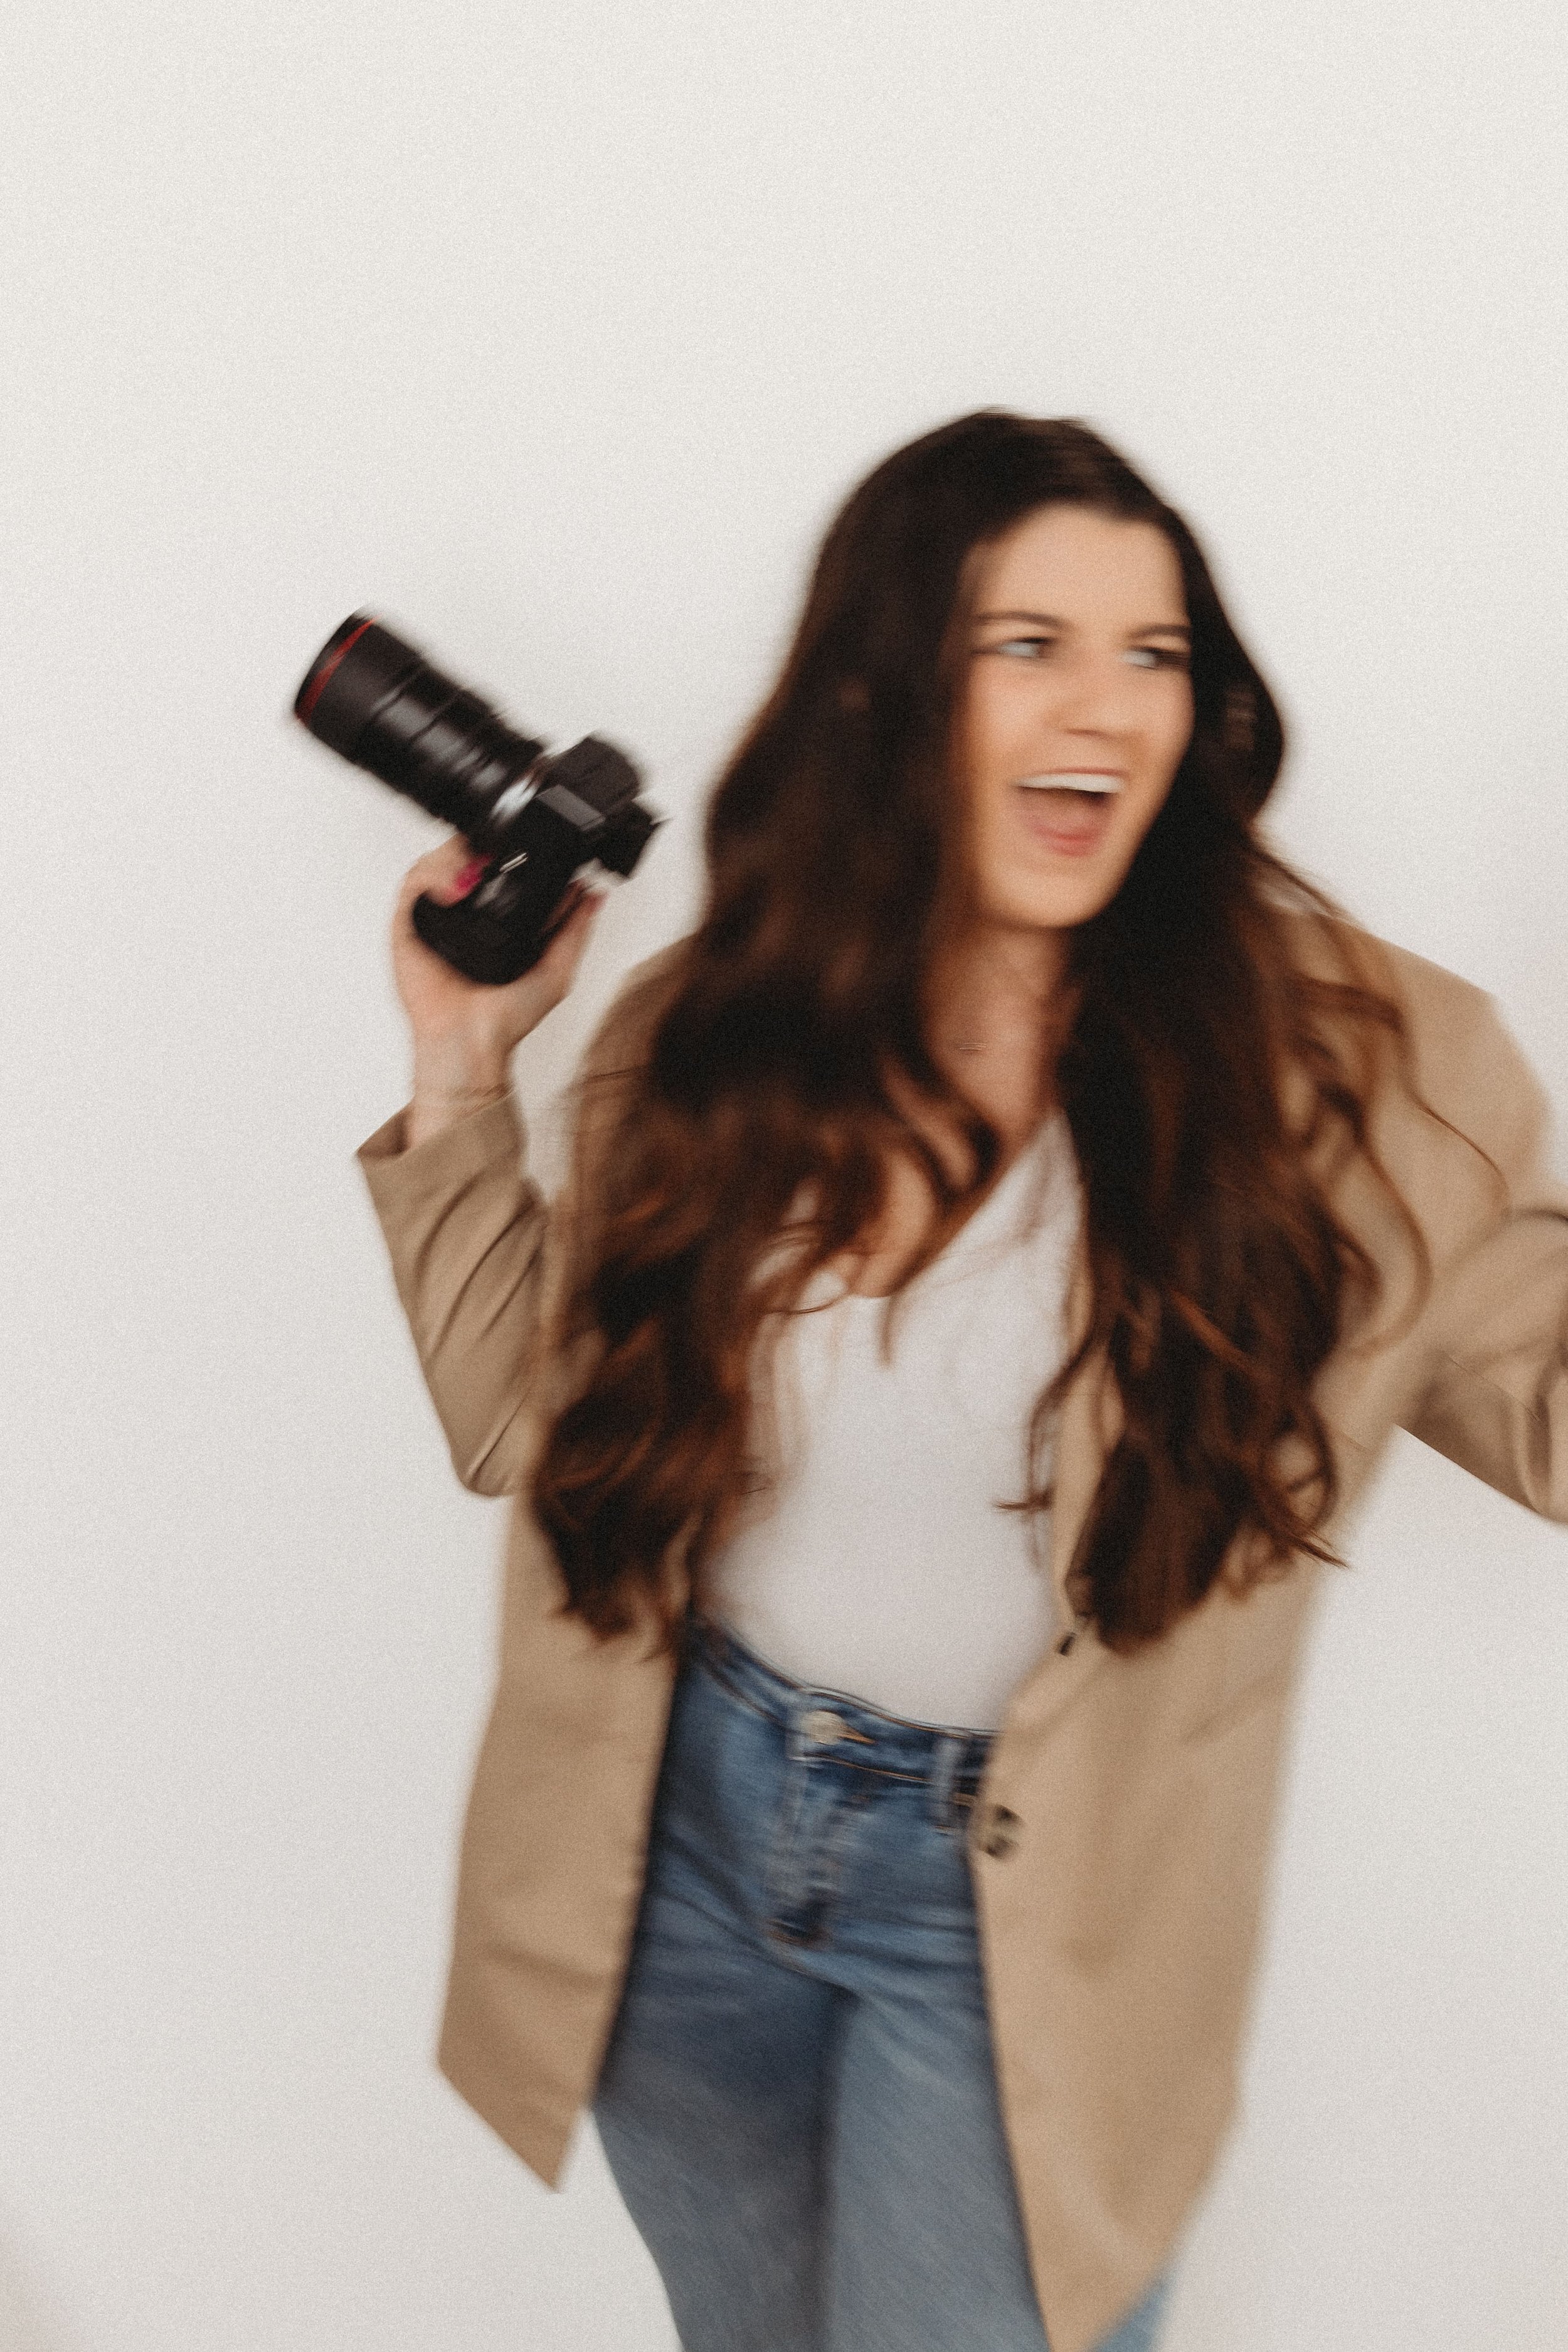  hannah laughs with her camera in hand in this motion blur portrait from her brand photos 